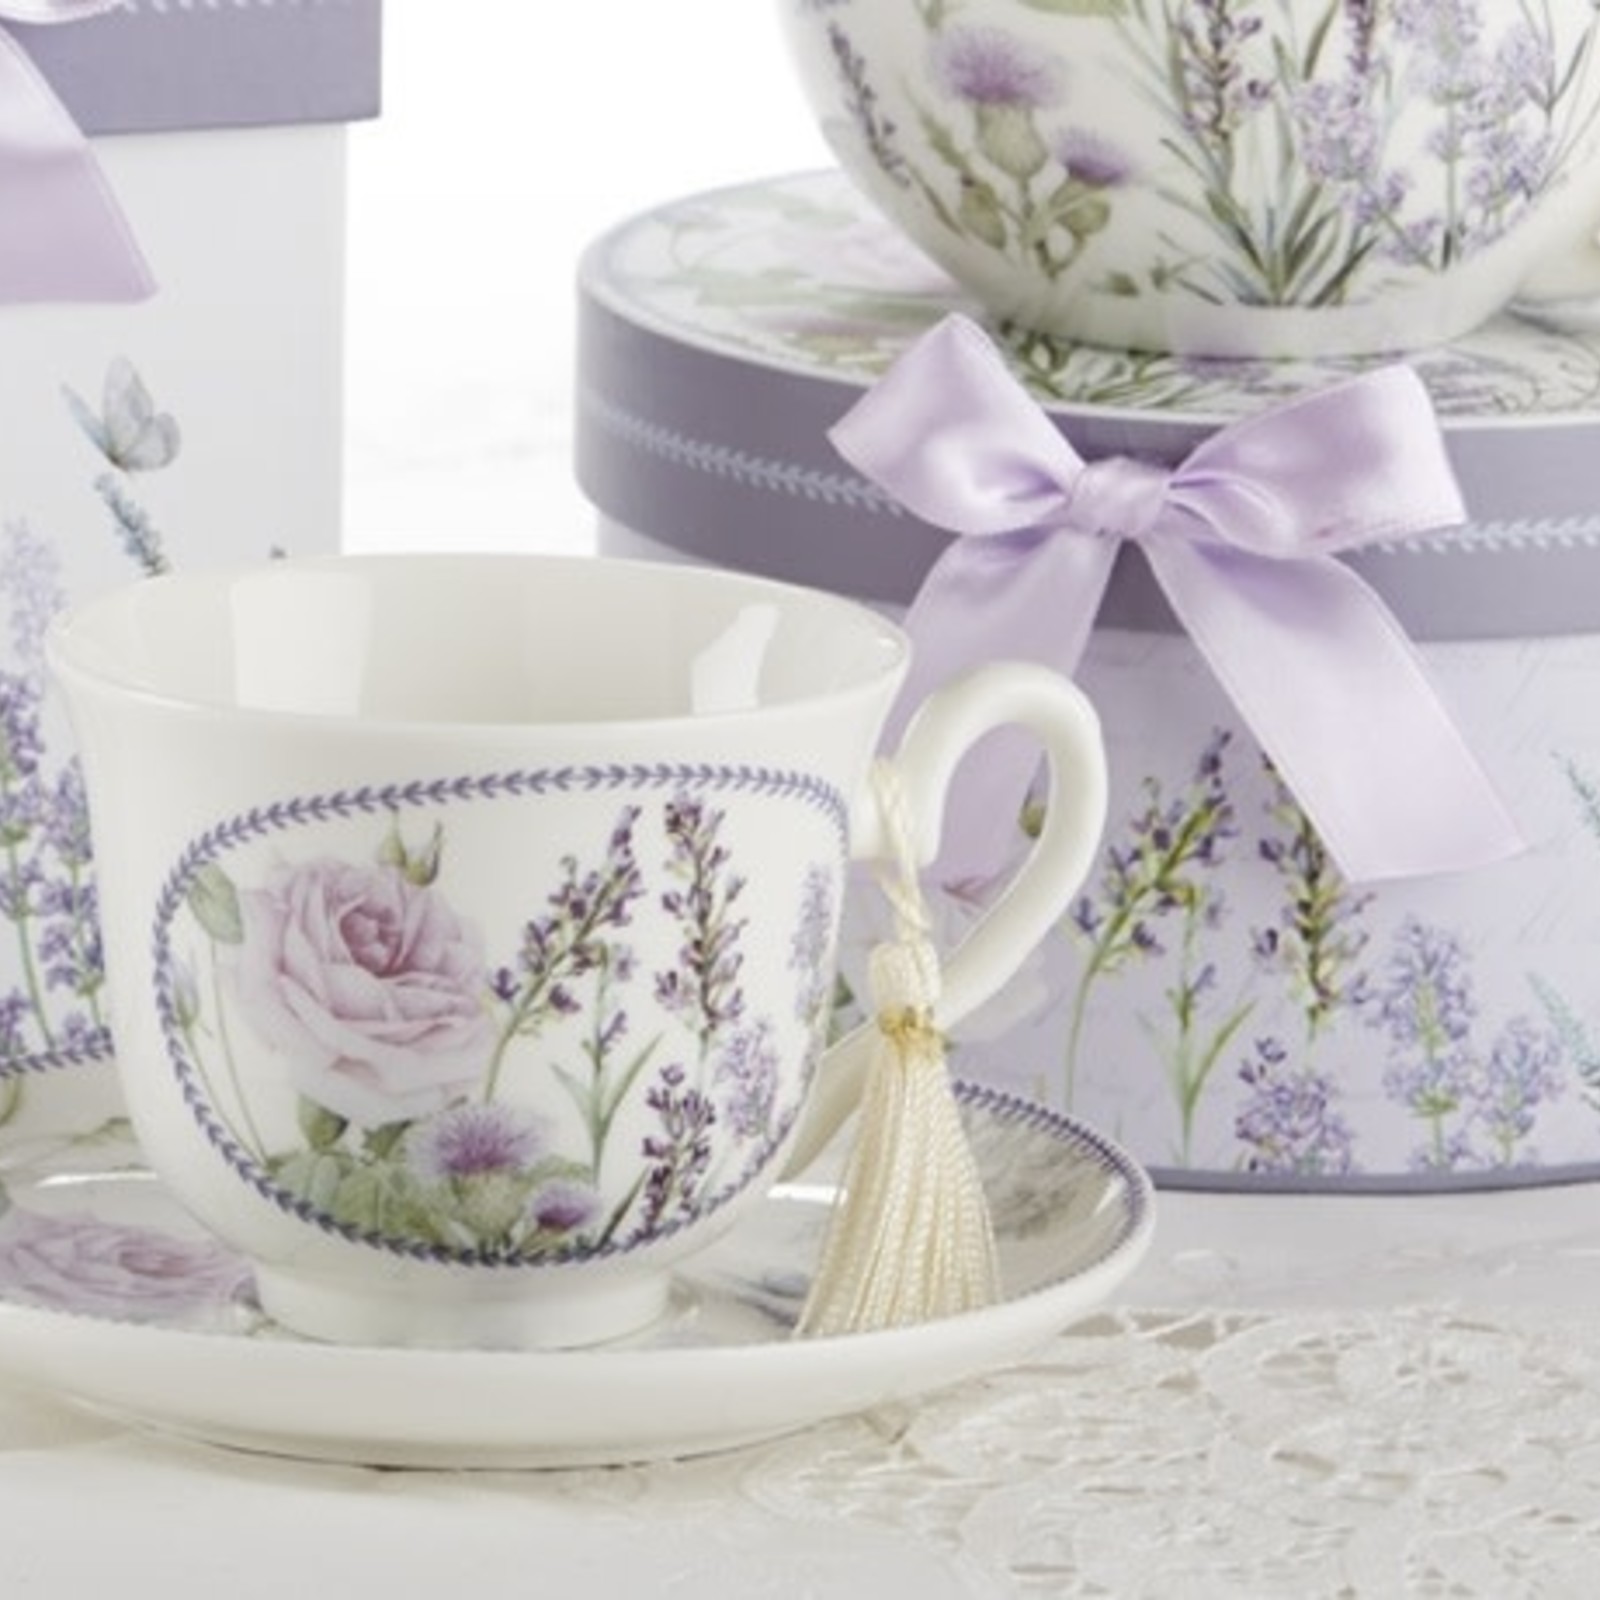 Delton Products 3.5" Porcelain Cup/Saucer In Gift Box, Lavender  8101-7 loading=